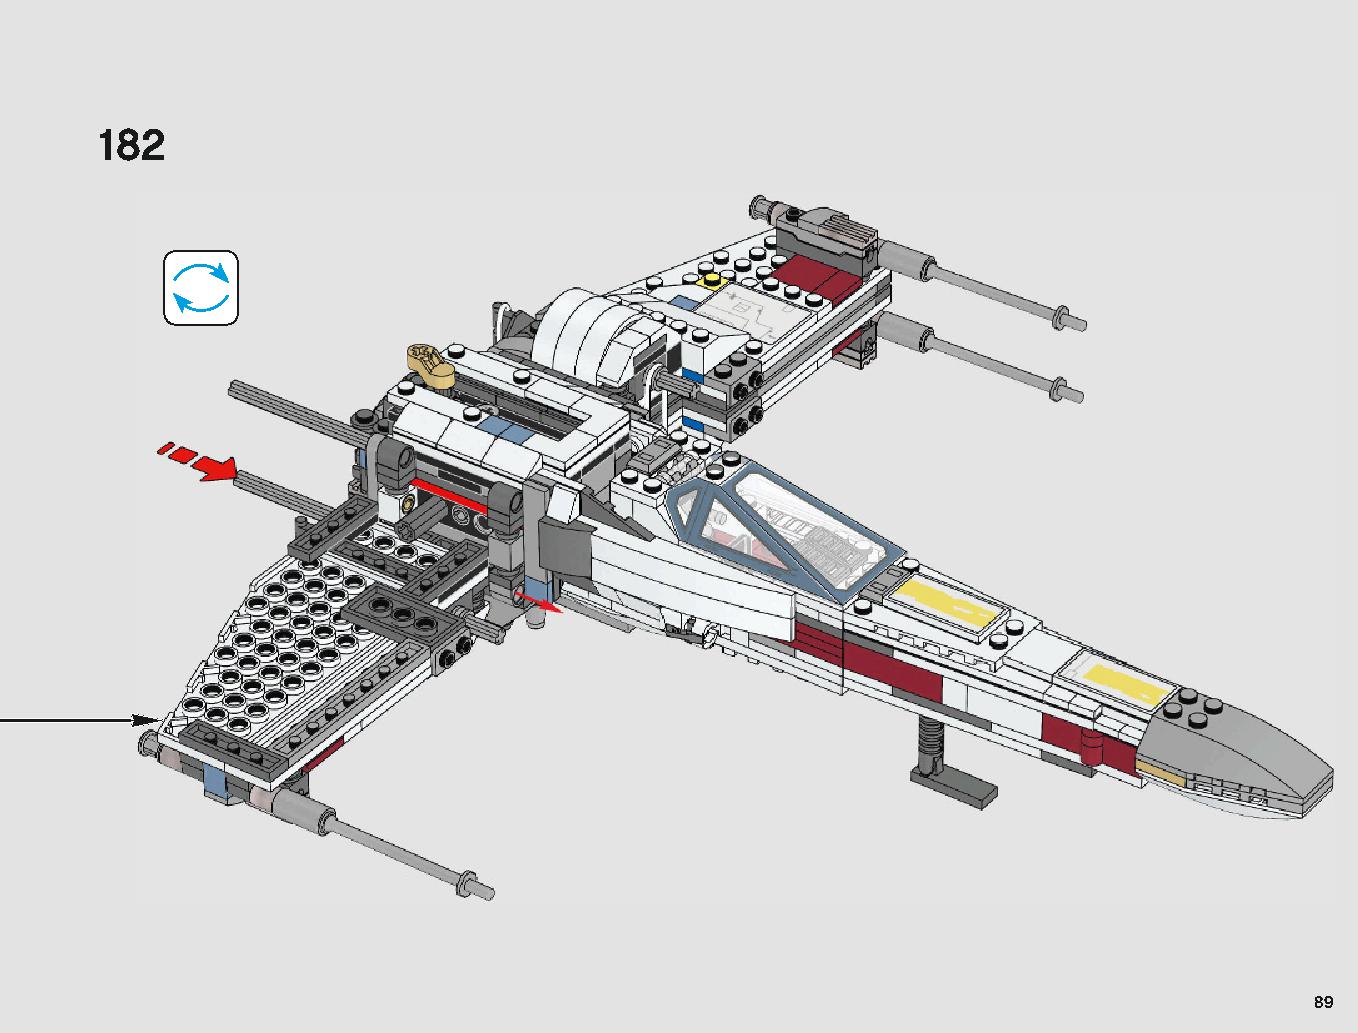 X-Wing Starfighter 75218 LEGO information LEGO instructions 89 page